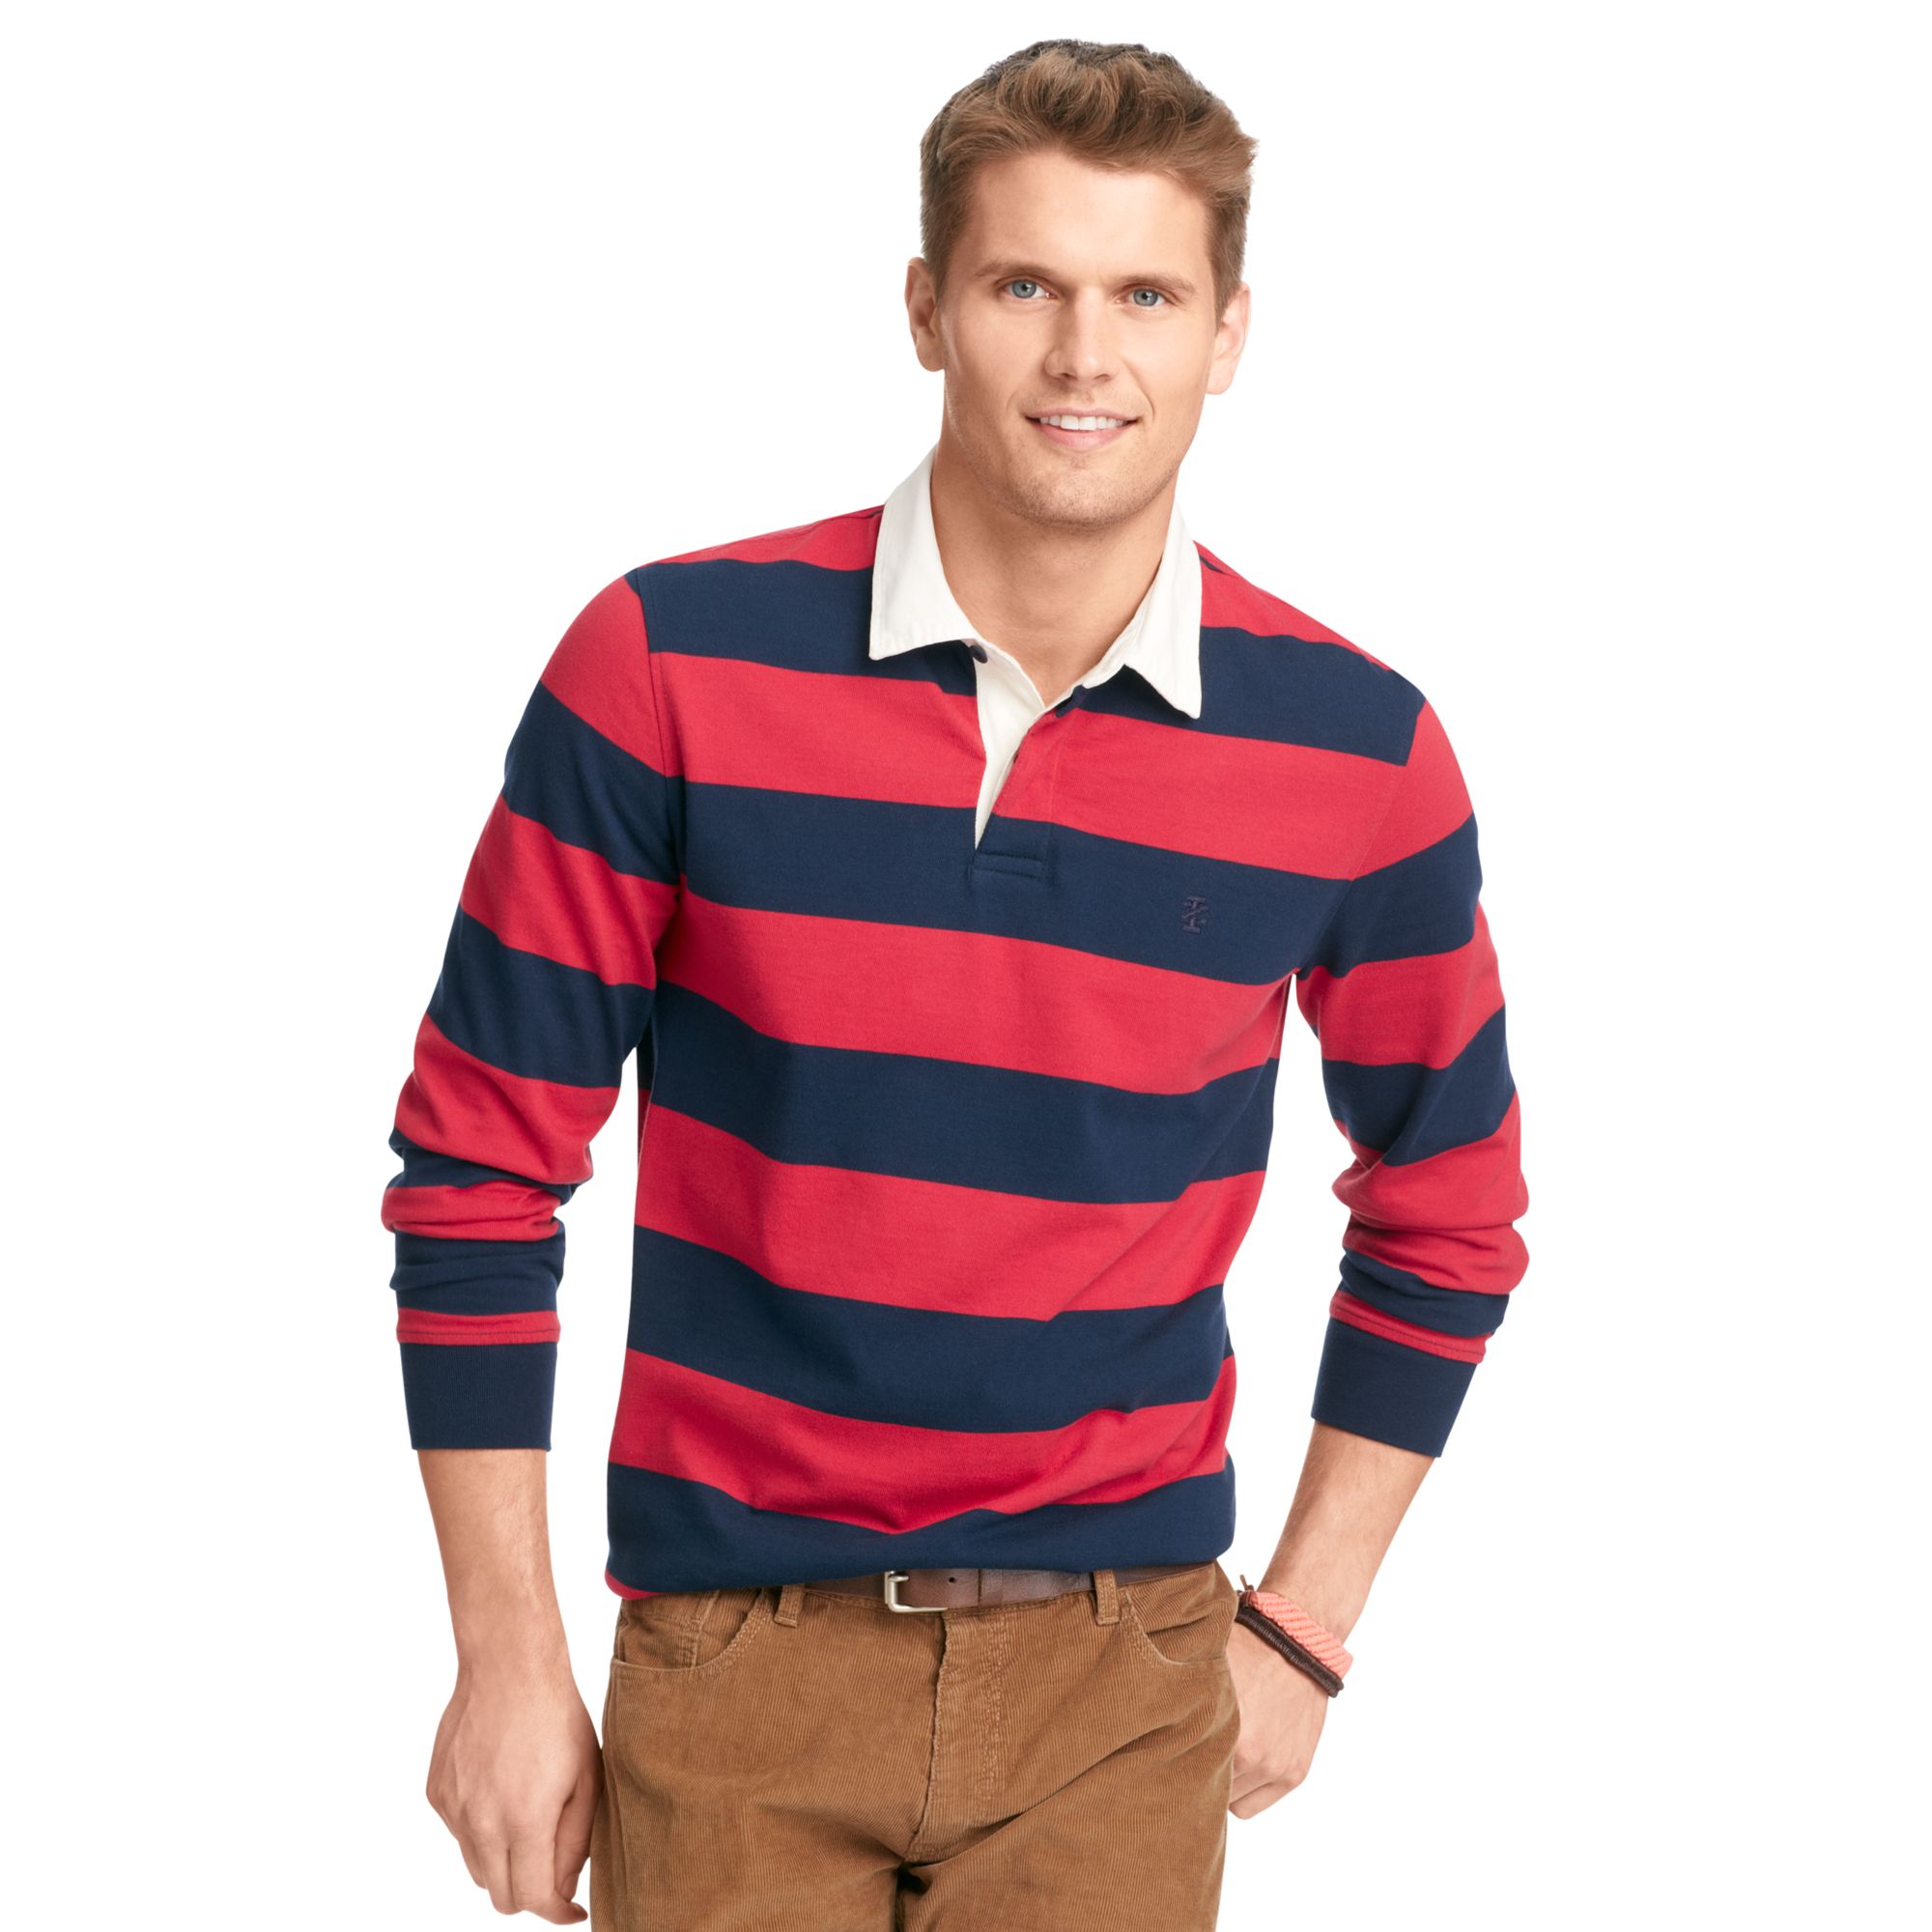 Lyst - Izod Izod Shirt Longsleeve 5050 Striped Rugby Polo in Red for Men